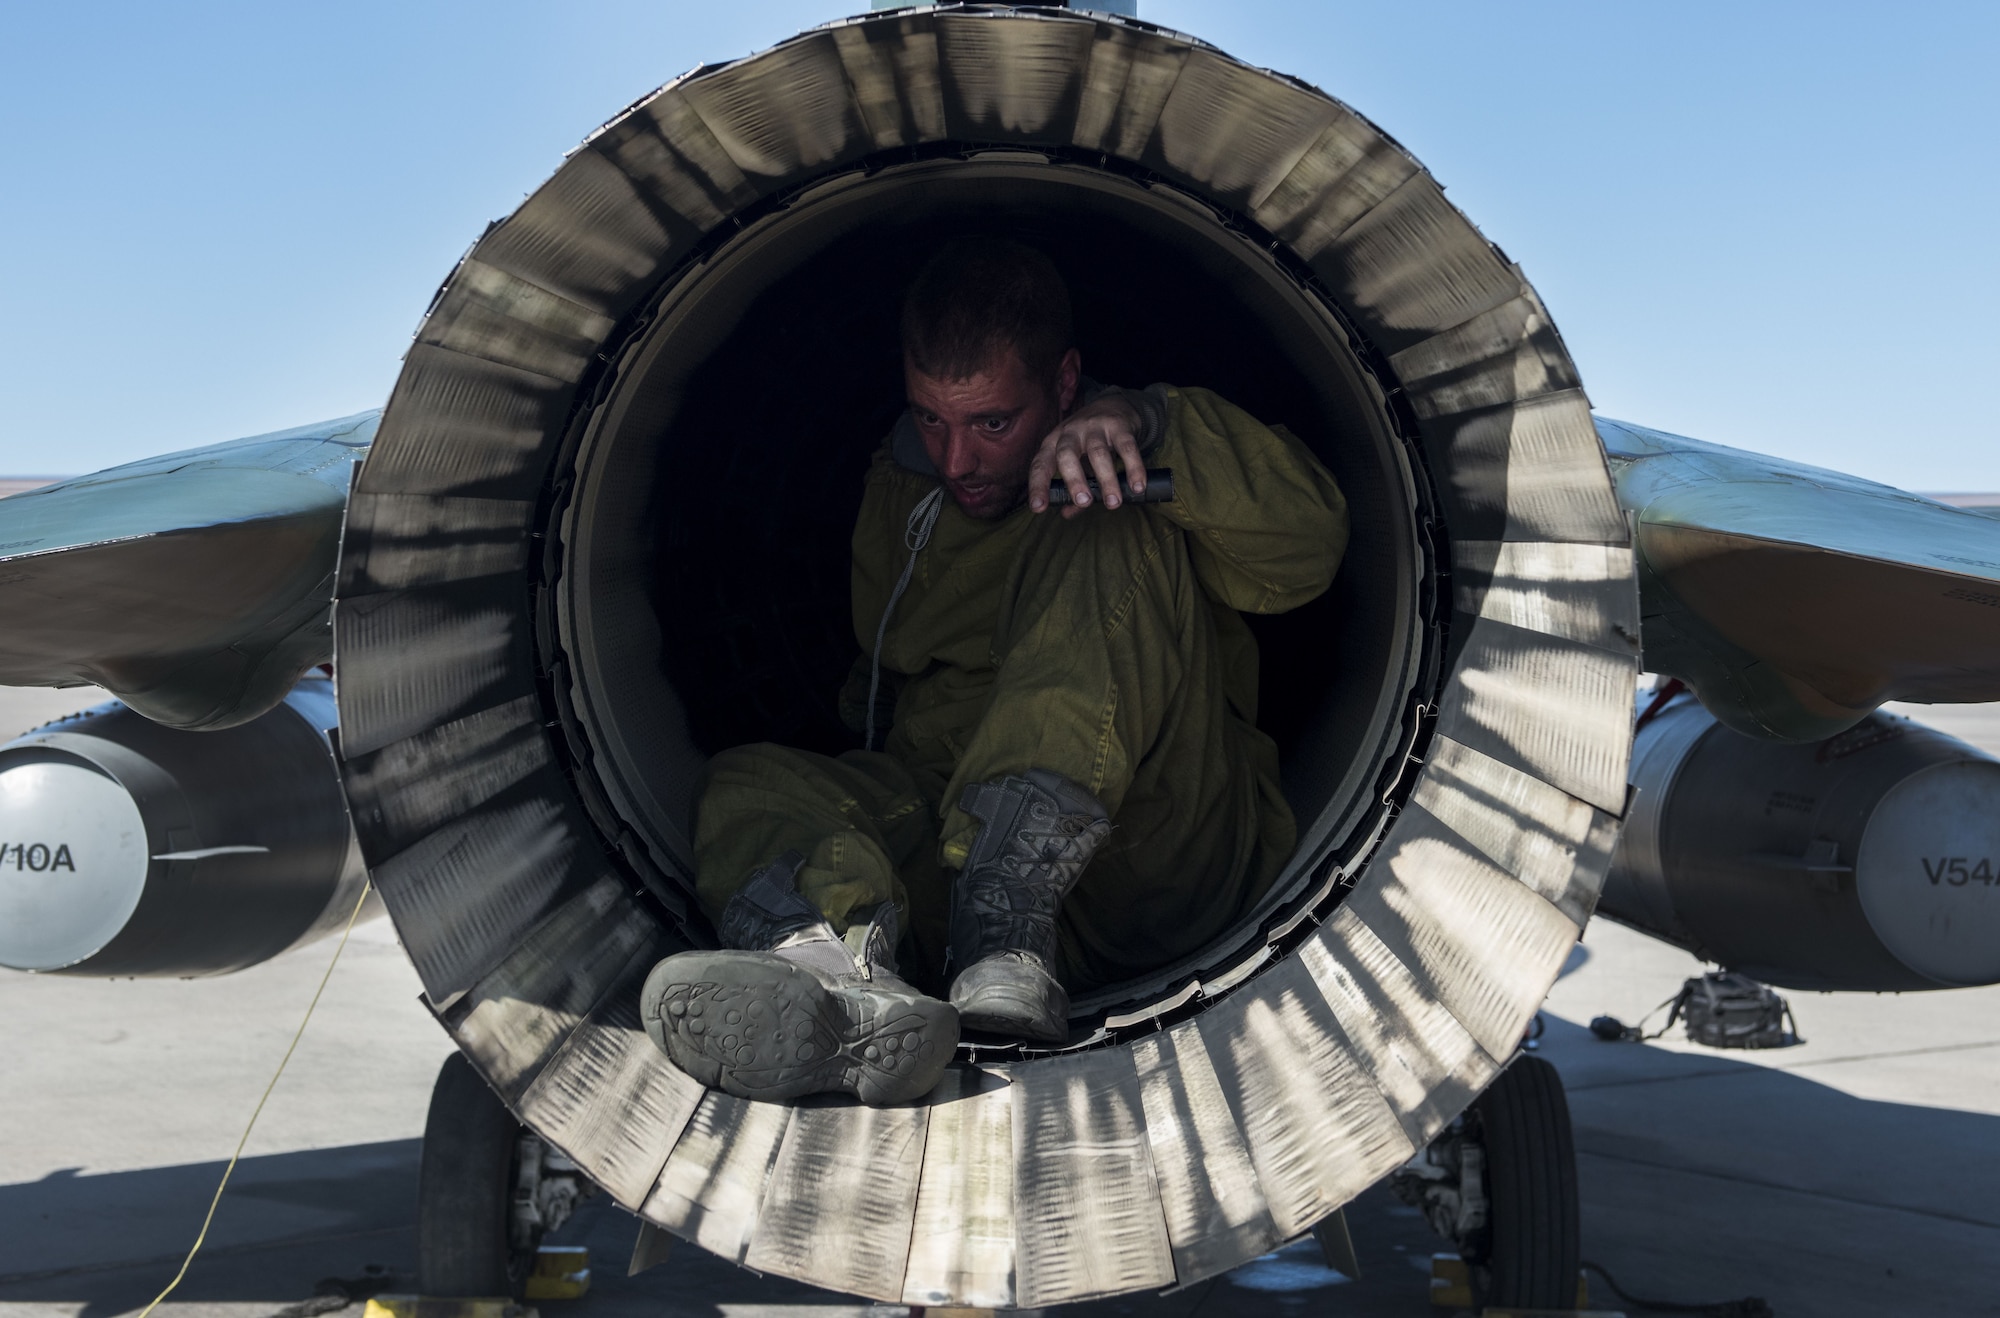 Staff Sgt. Michael Dalrymple, 57th Aircraft Maintenance Squadron crew chief, checks the exhaust of an F-16 Fighting Falcon on the flight line at Nellis Air Force Base, Nev., Aug. 25, 2017. Dalrymple is assigned to the Aggressors who are responsible for providing the opposing threat during training exercises at Nellis AFB. (U.S. Air Force photo by Senior Airman Kevin Tanenbaum)